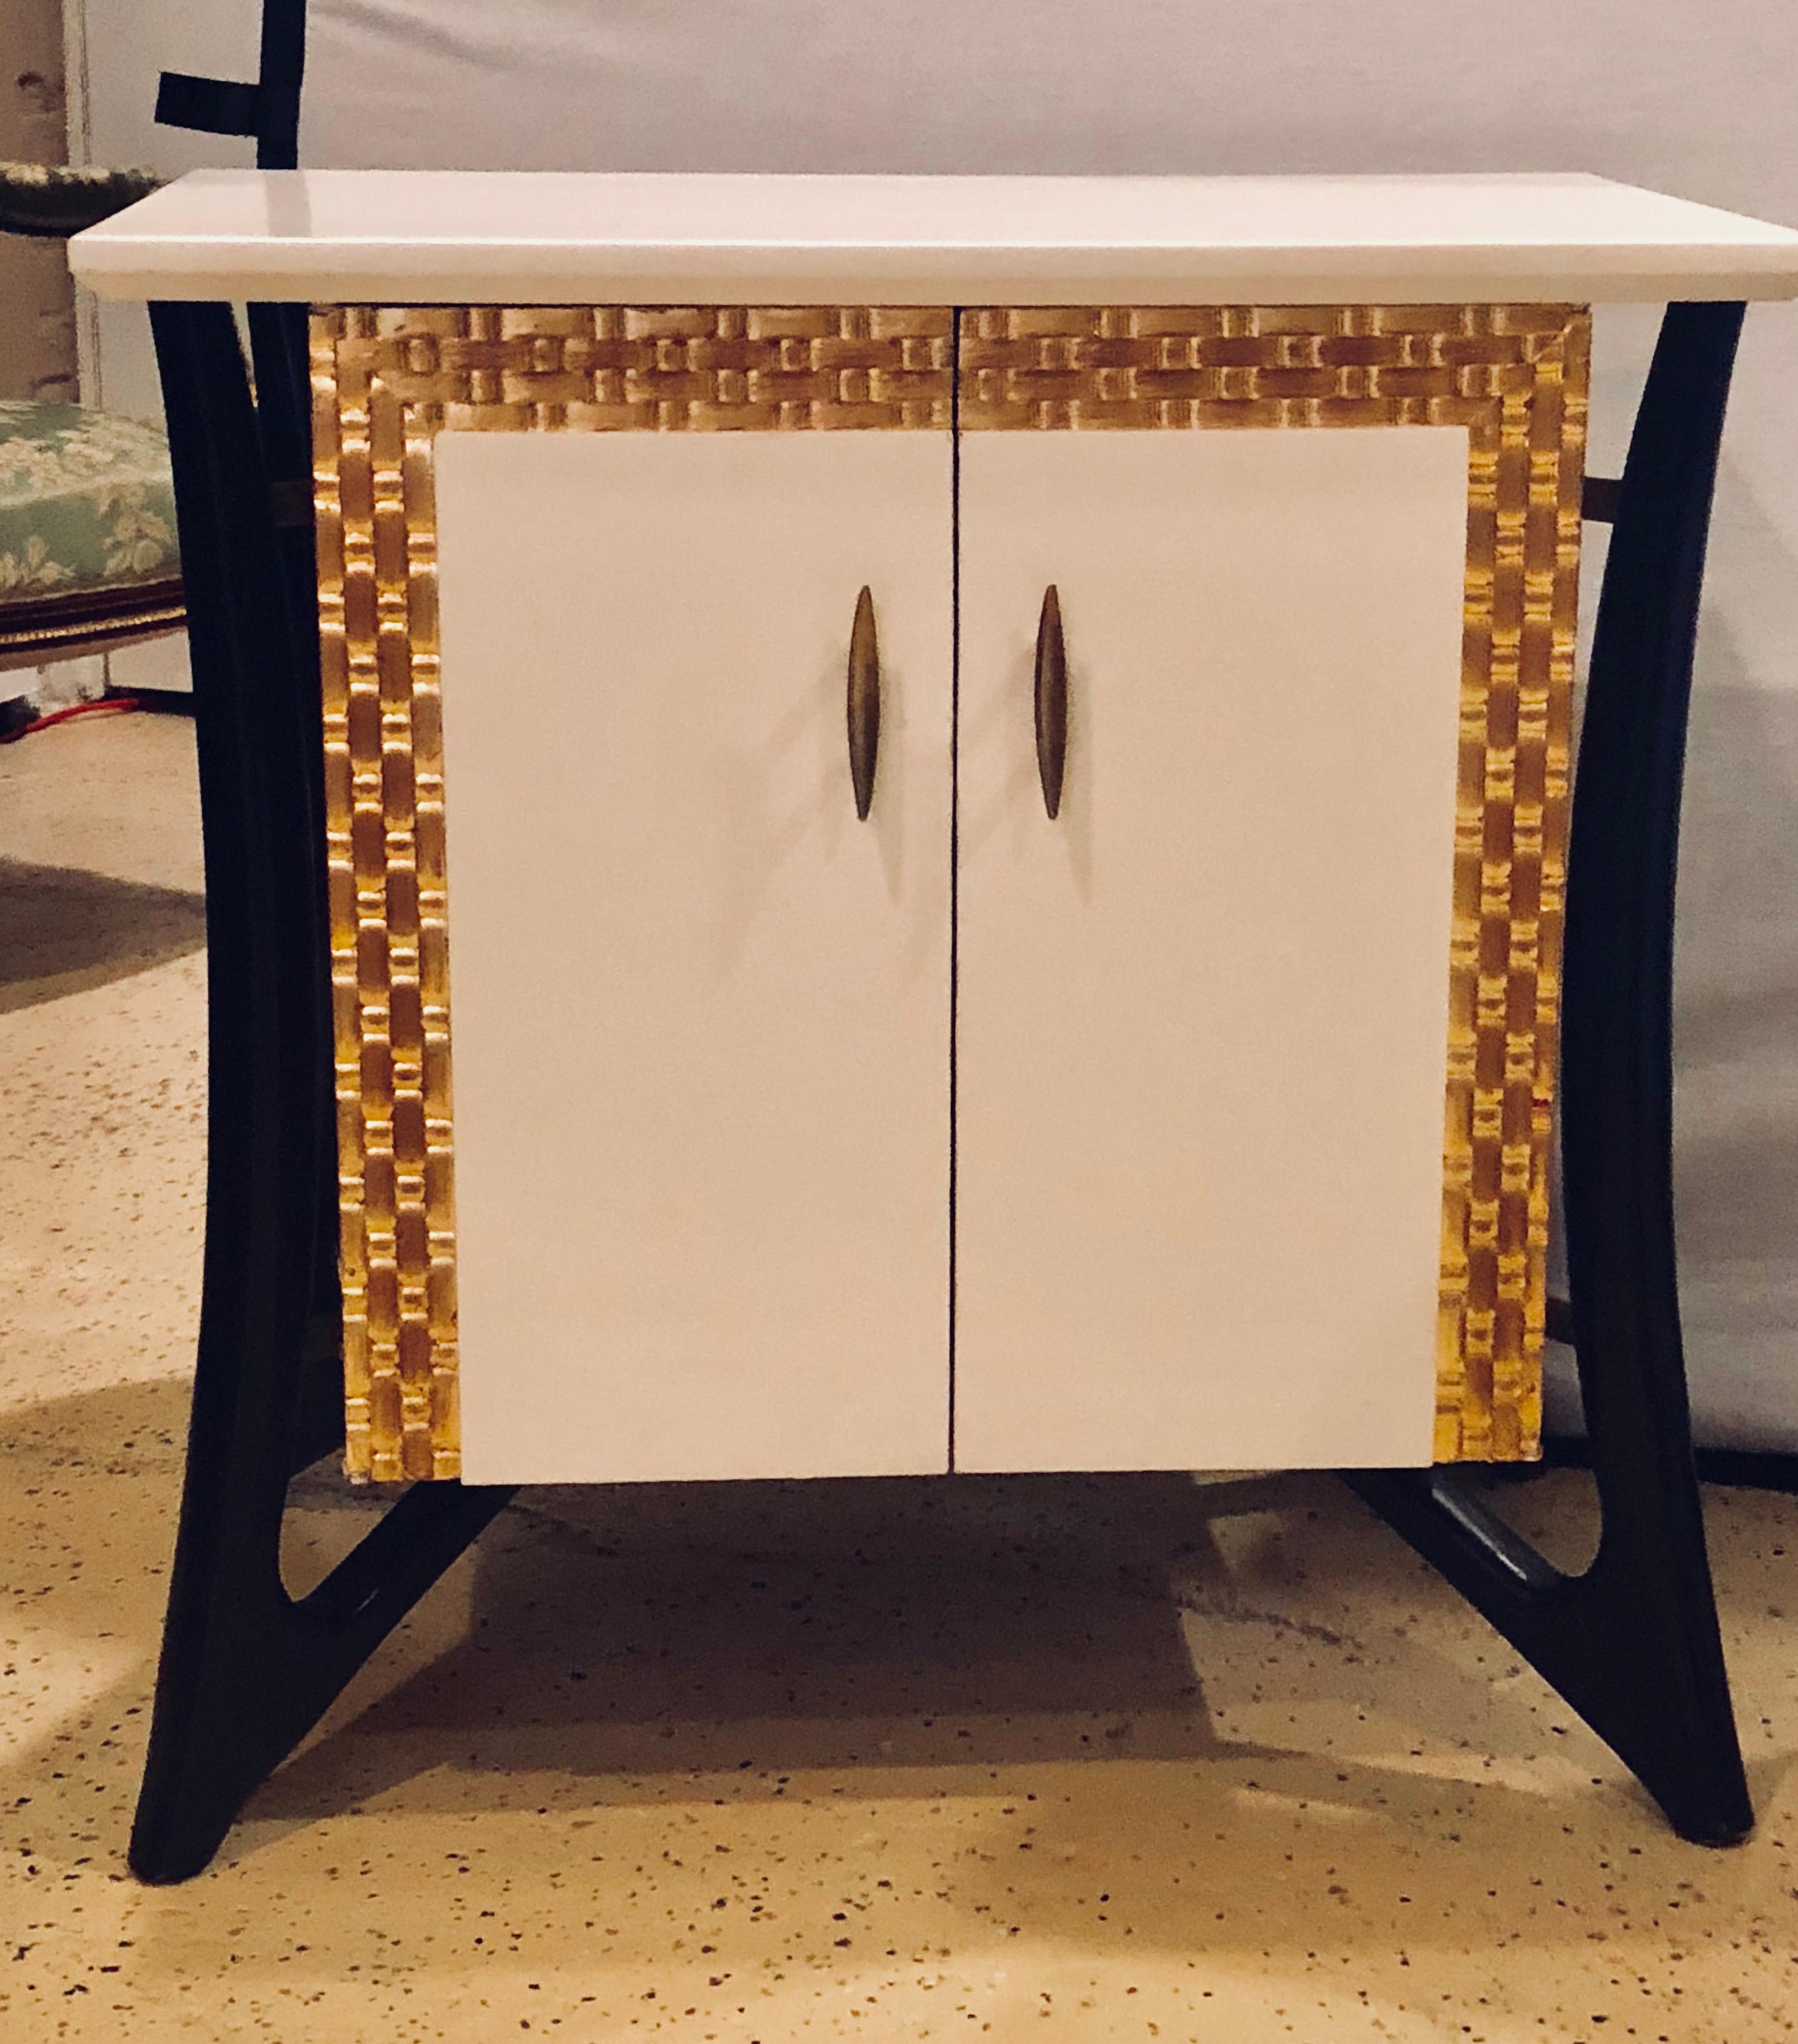 A Fine pair of 1940s custom quality Hollywood Regency style parcel paint and gilt decorated night stands / end tables. This is simply a stunning pair of recently decorated and refinished night stands or end tables in the Mid-Century Modern flair.